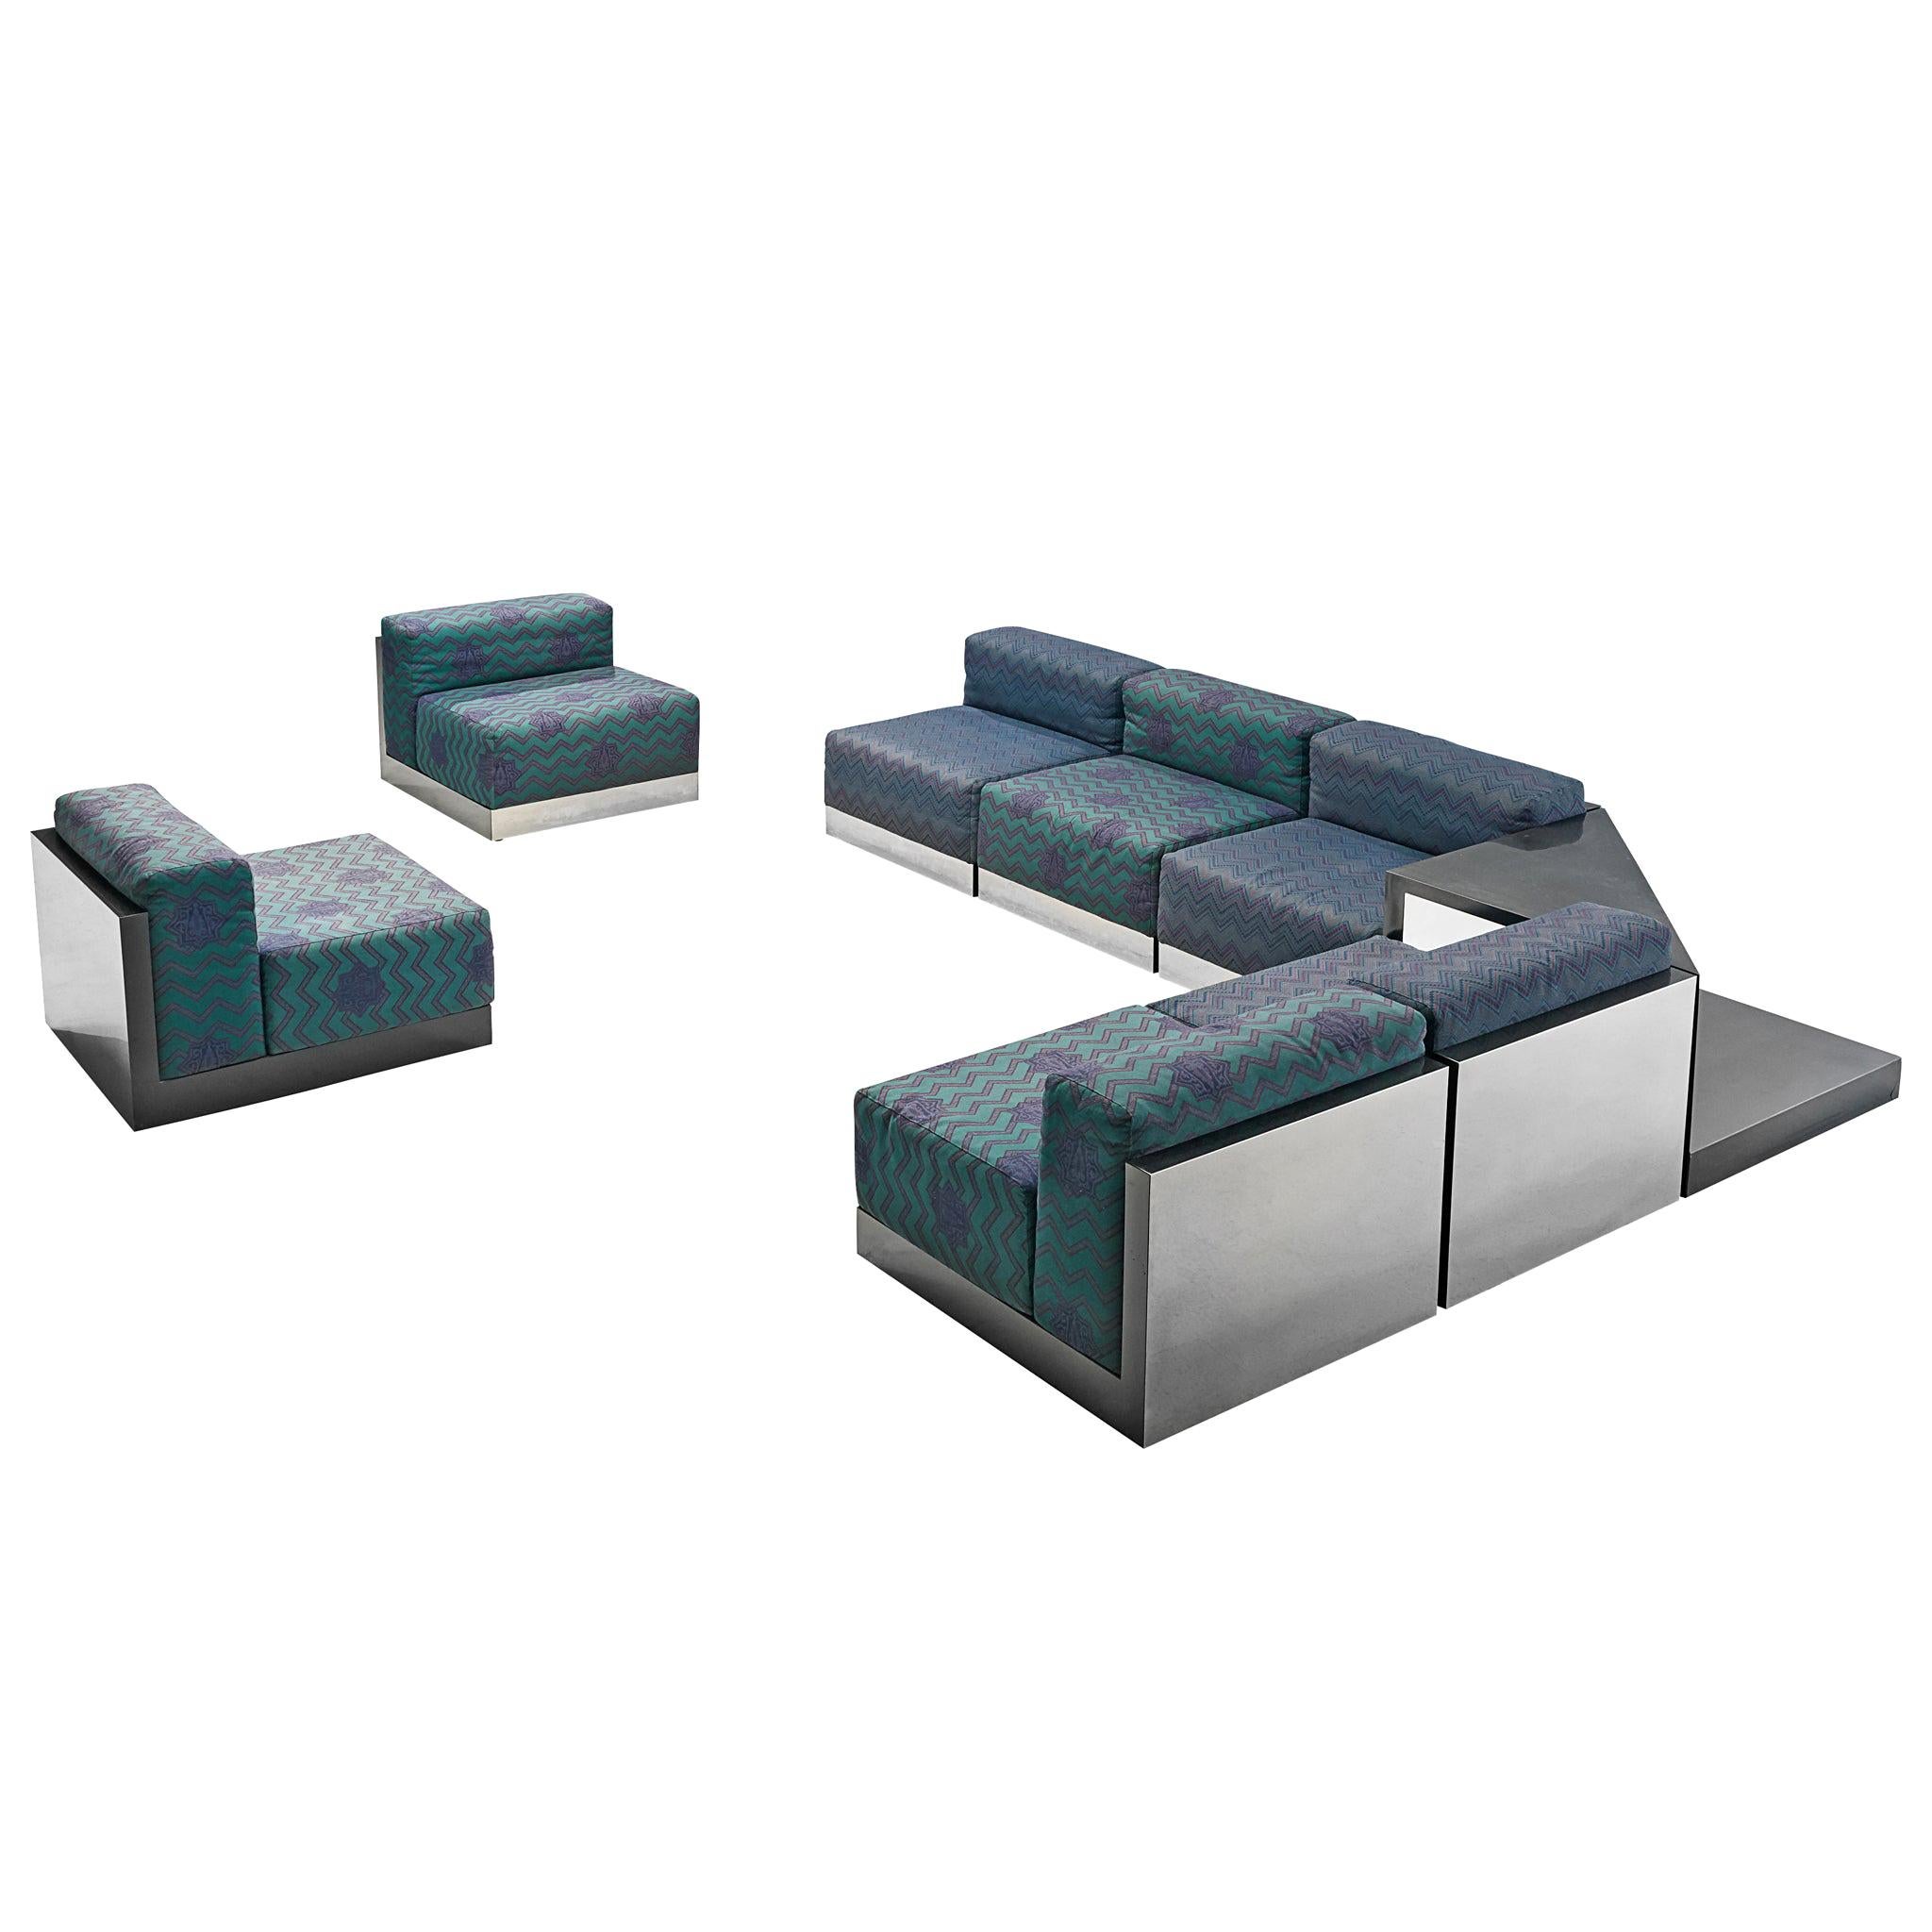 Italian Postmodern Sectional Sofa in Turquoise and Blue Upholstery